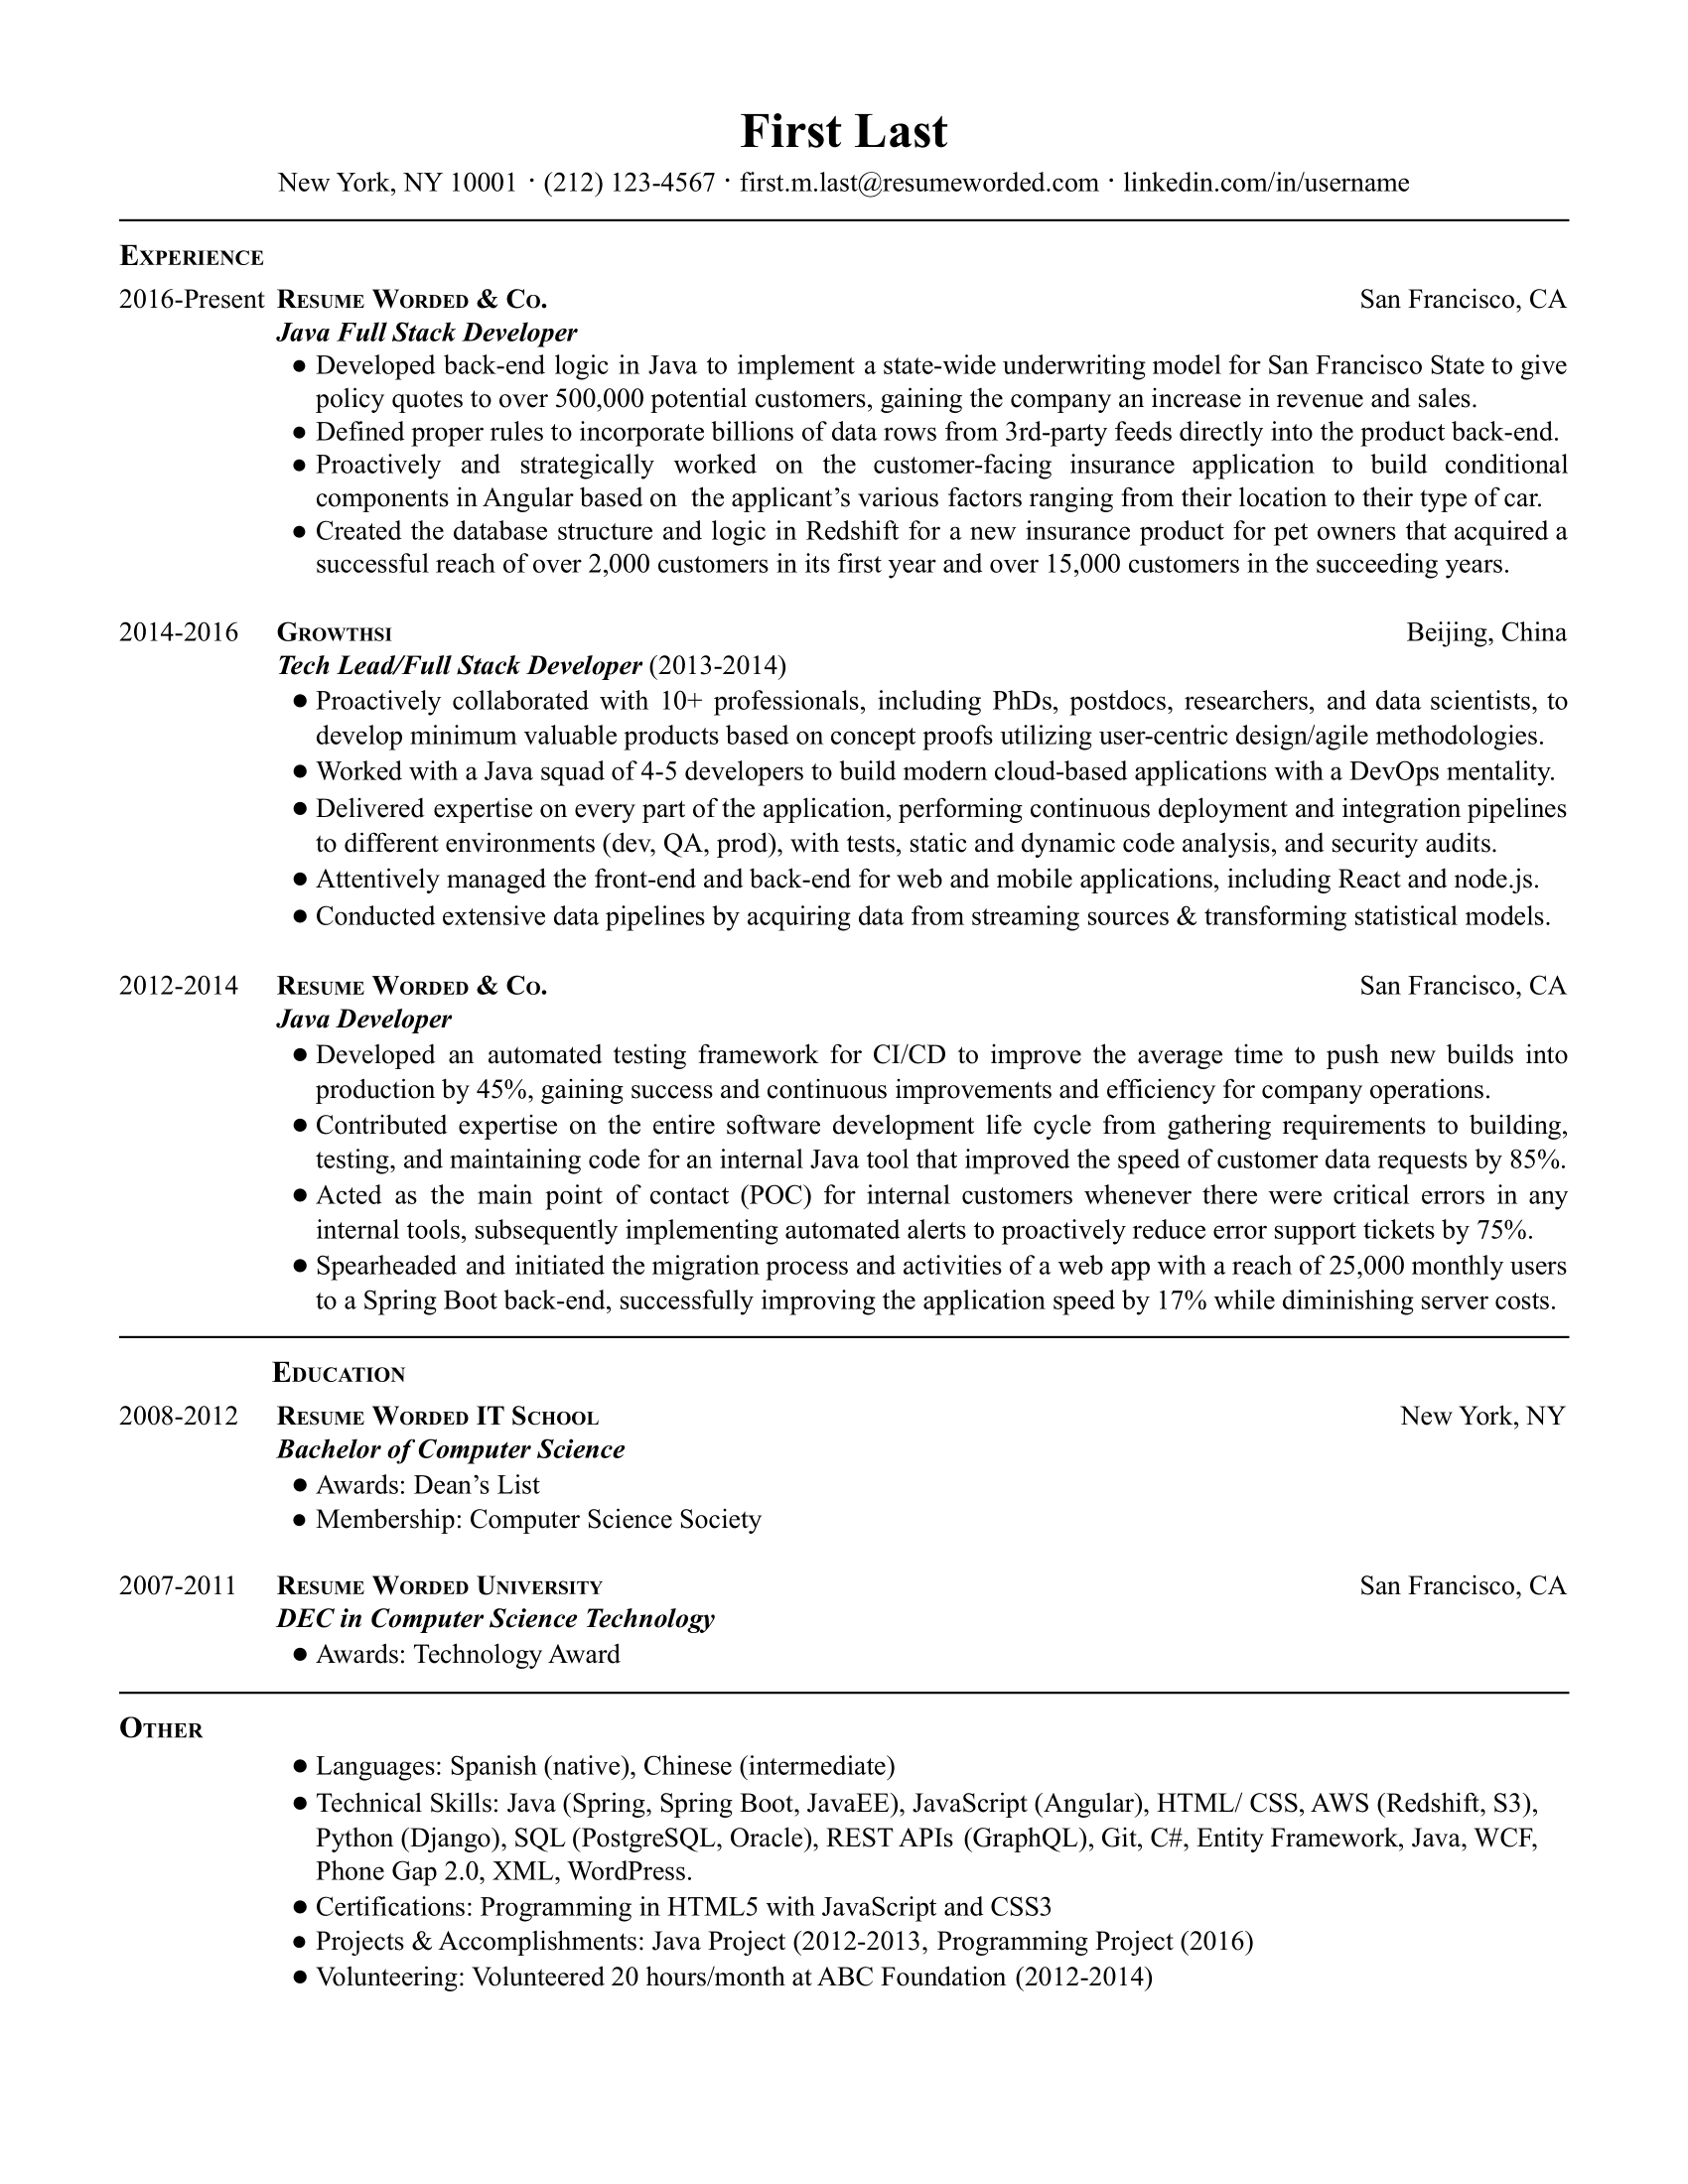 Java full stack developer resume which has strong work experience and skills sections.